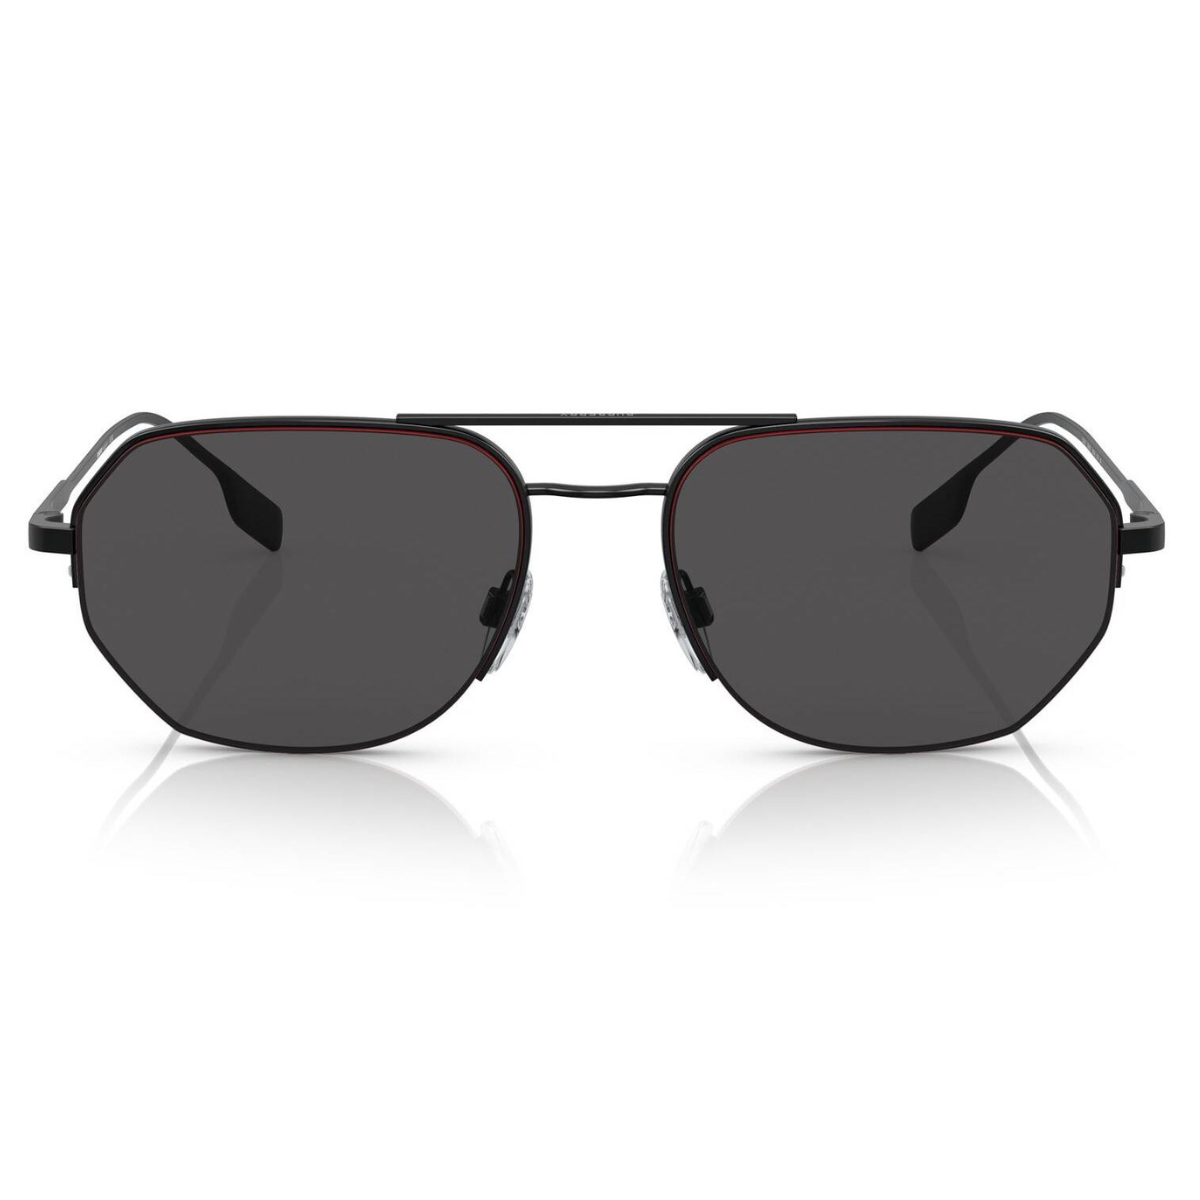 "Elevate your look with Burberry 3140 sunglasses for men at Optorium: Choose from pilot shape, polarized, and non-polarized options, the ultimate in stylish eyewear for men."